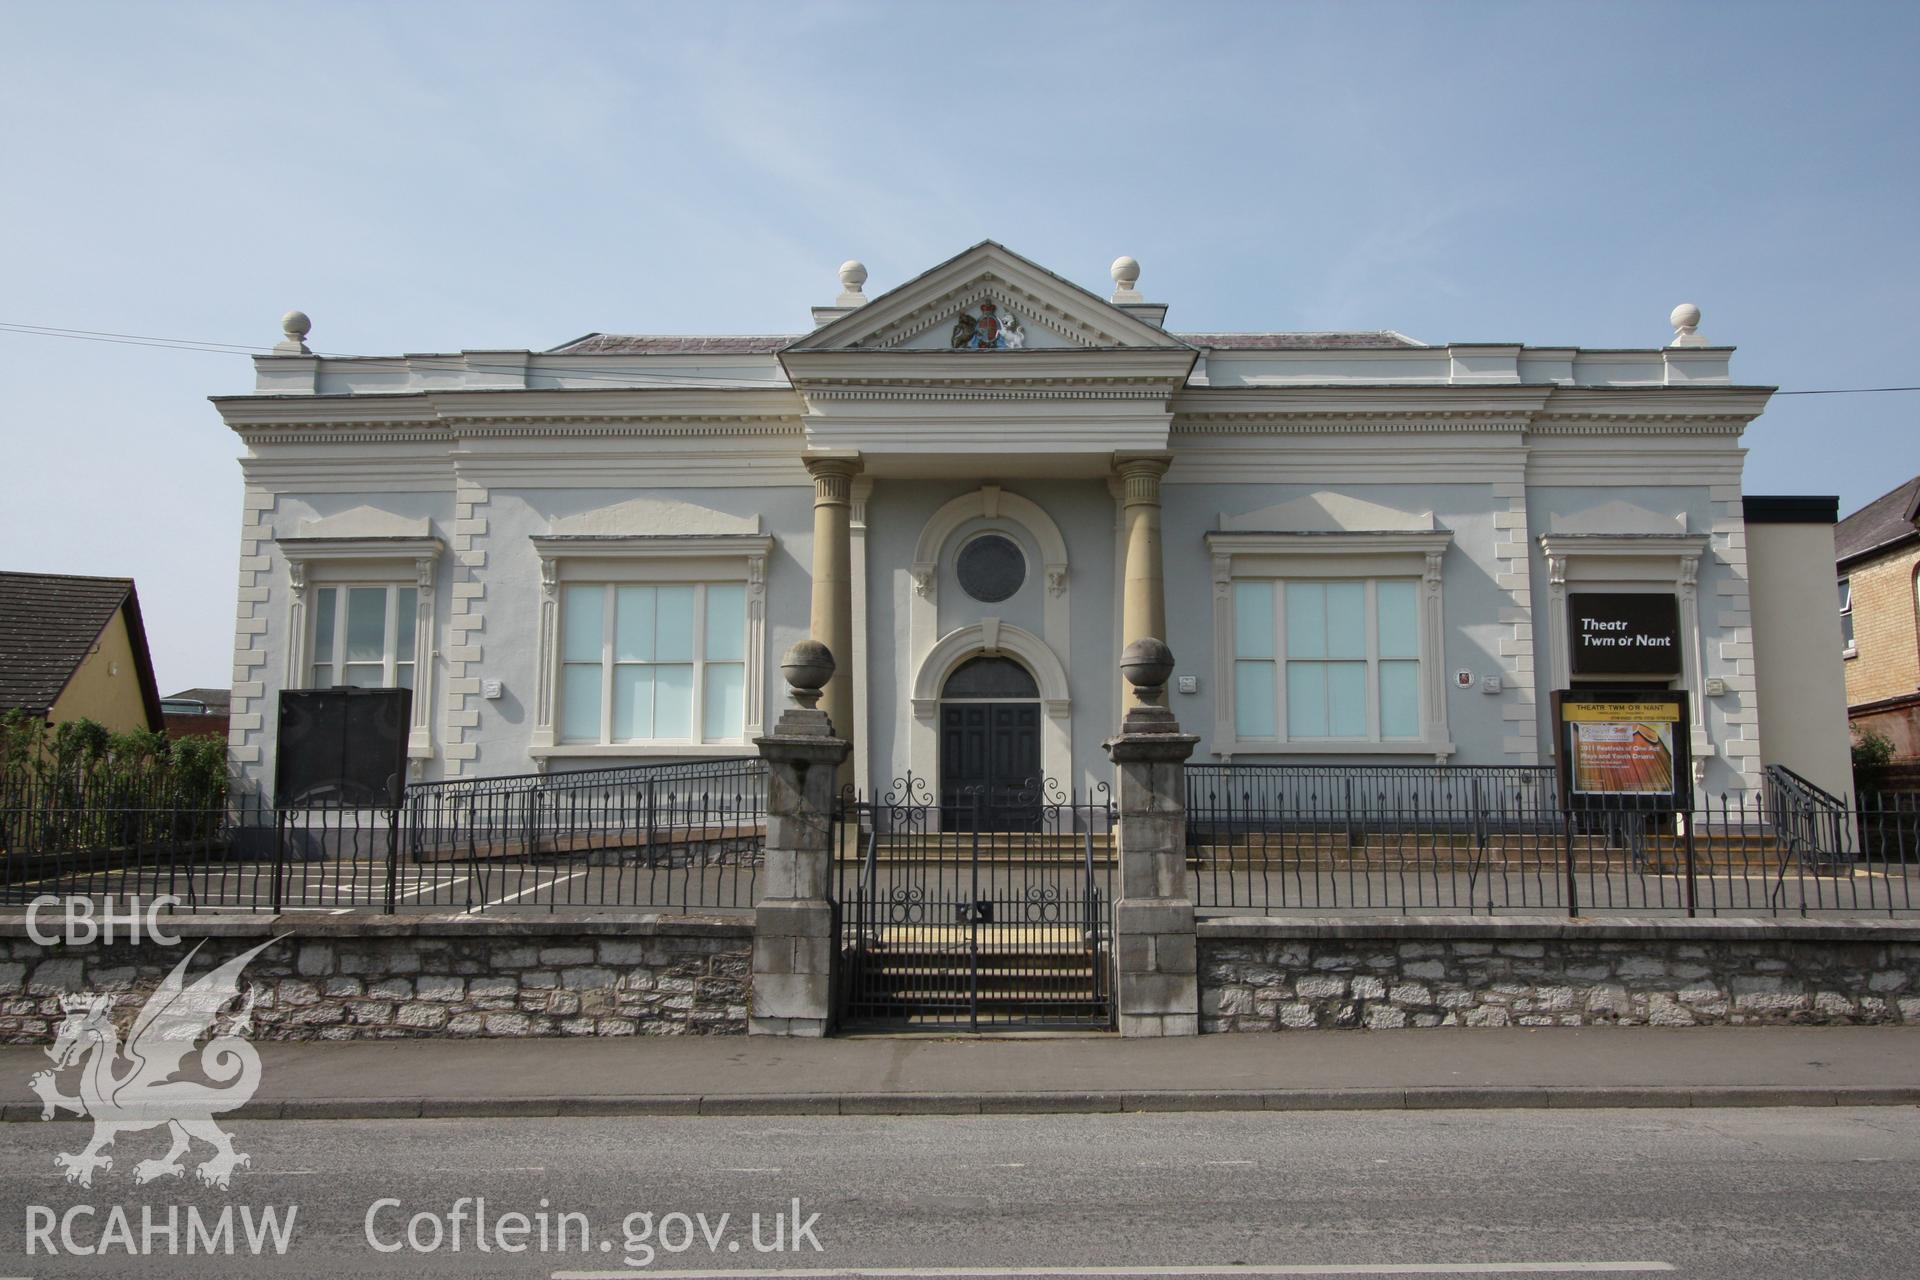 Colour photograph showing exterior view of Theatr Twm o'r Nant (otherwise known as the Dr. Pierce Memorial Hall). Photographed during survey conducted by Geoff Ward in May 2012.